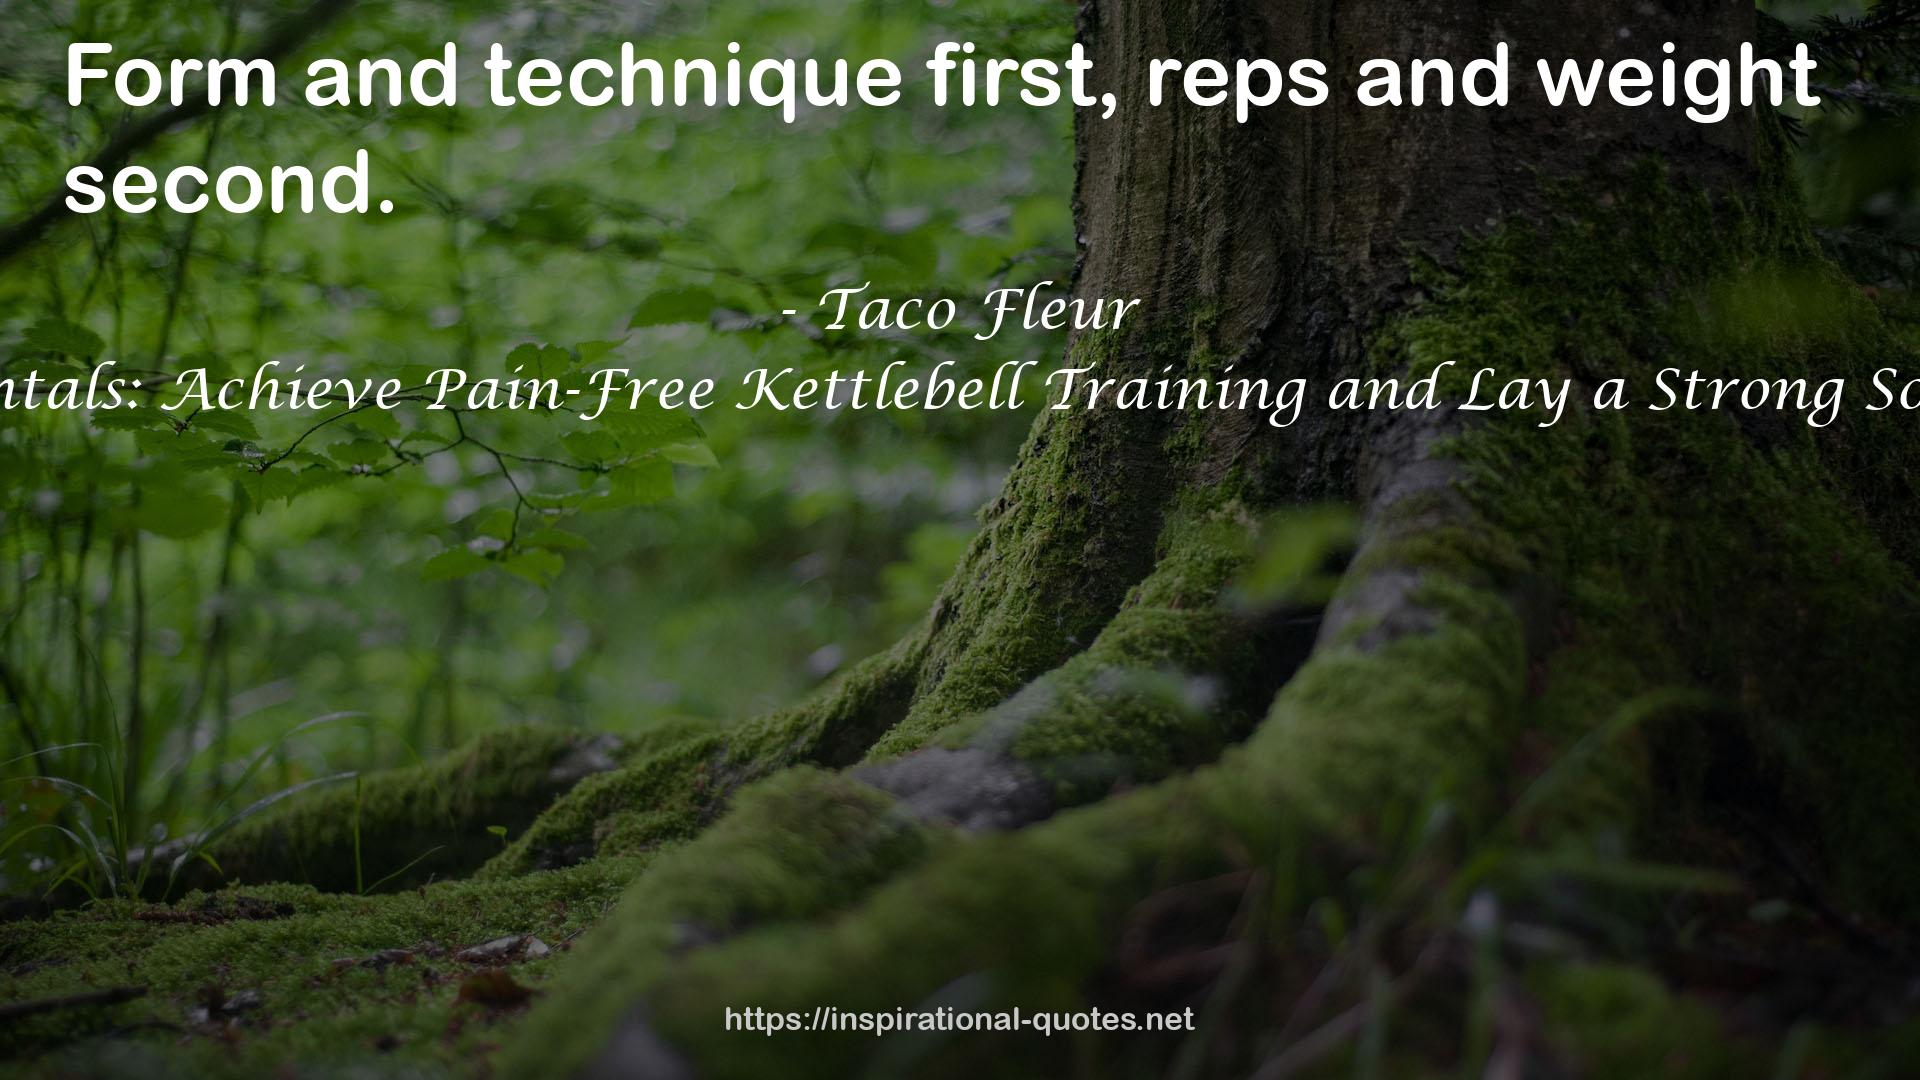 Kettlebell Training Fundamentals: Achieve Pain-Free Kettlebell Training and Lay a Strong Solid Foundation to Build Upon QUOTES